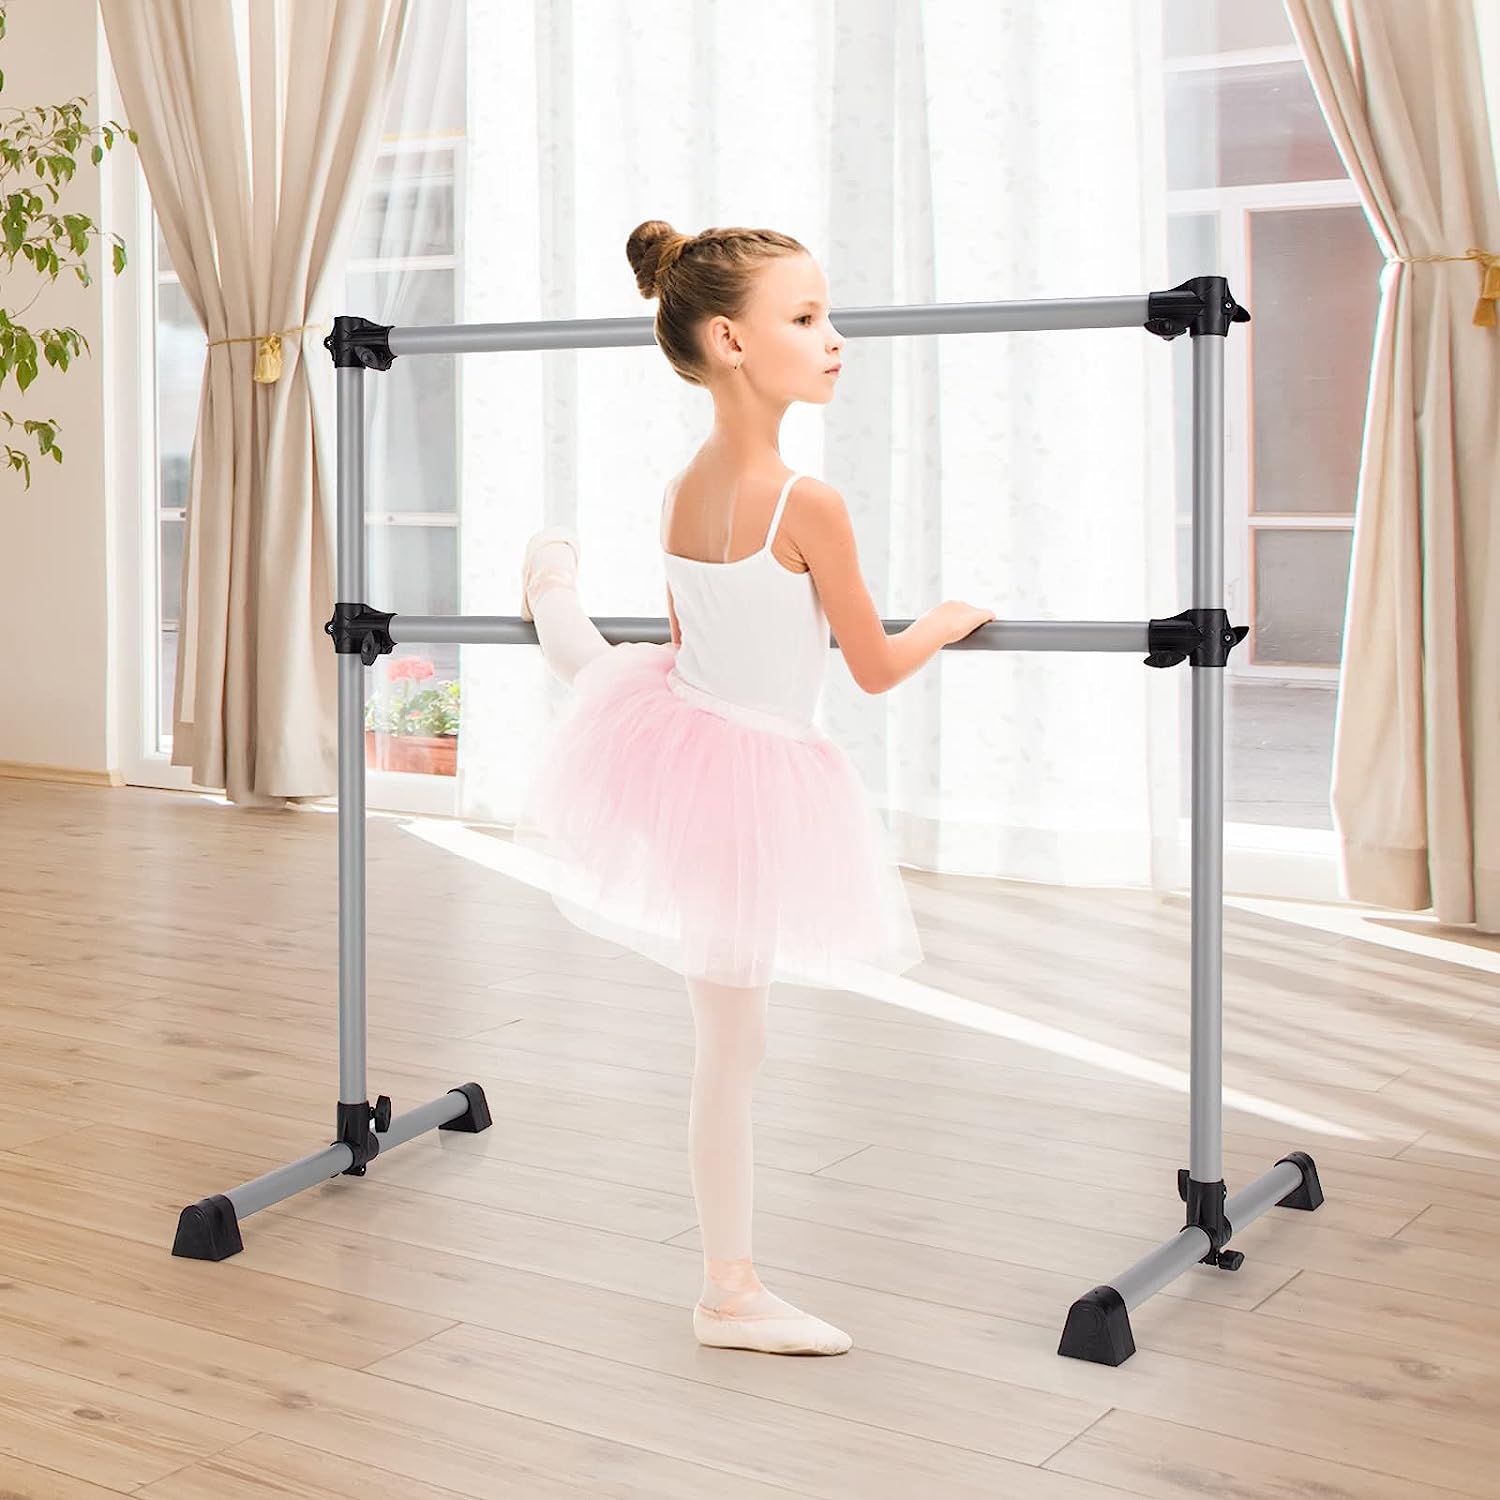 4FT Ballet Barre Portable, Freestanding Double Ballet Barre Height Adjustable with Anti Slip Base, Heavy Duty Stretch Dance Bar for Home Workout